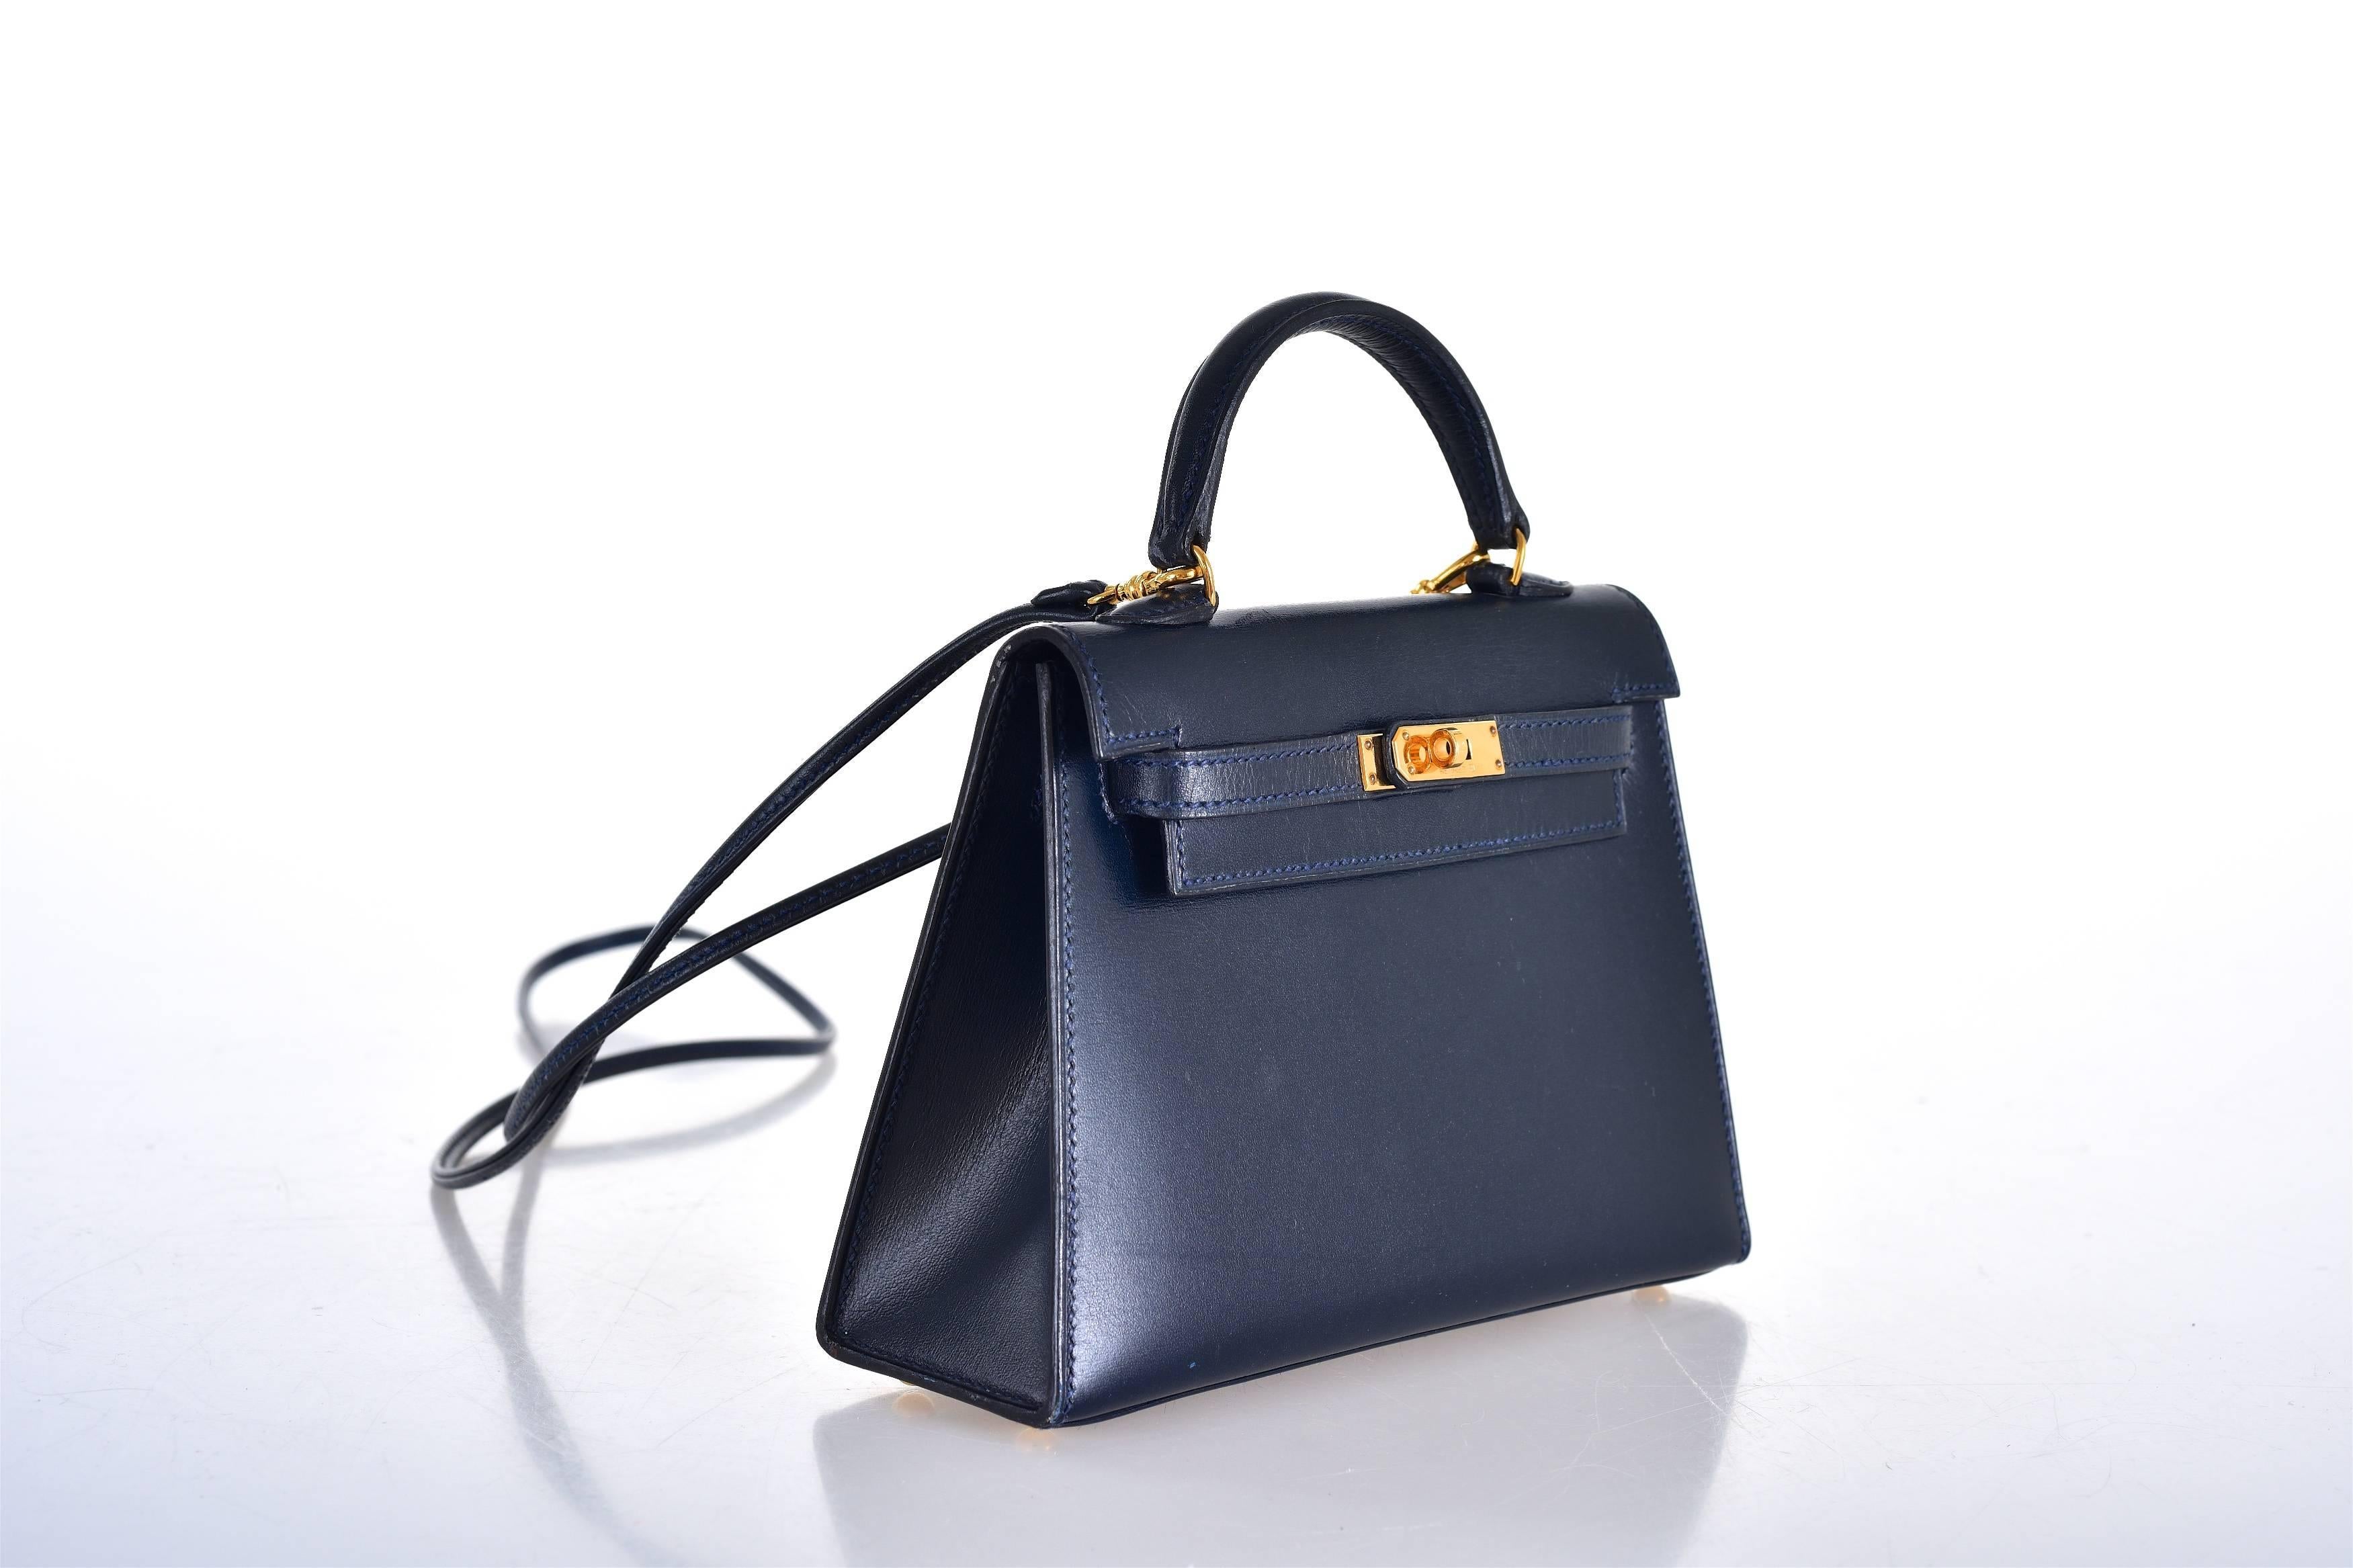 As always, another one of my fab finds! THE ONLY ONE ... CAN'T GET THIS! Hermes 15cm seller micro kelly with gold hardware.

MEASURES:
15cm (Bag Width: 15cm

Strap Shoulder Length: 18in Worn, 36in Total length

This bag is PRE-LOVED,